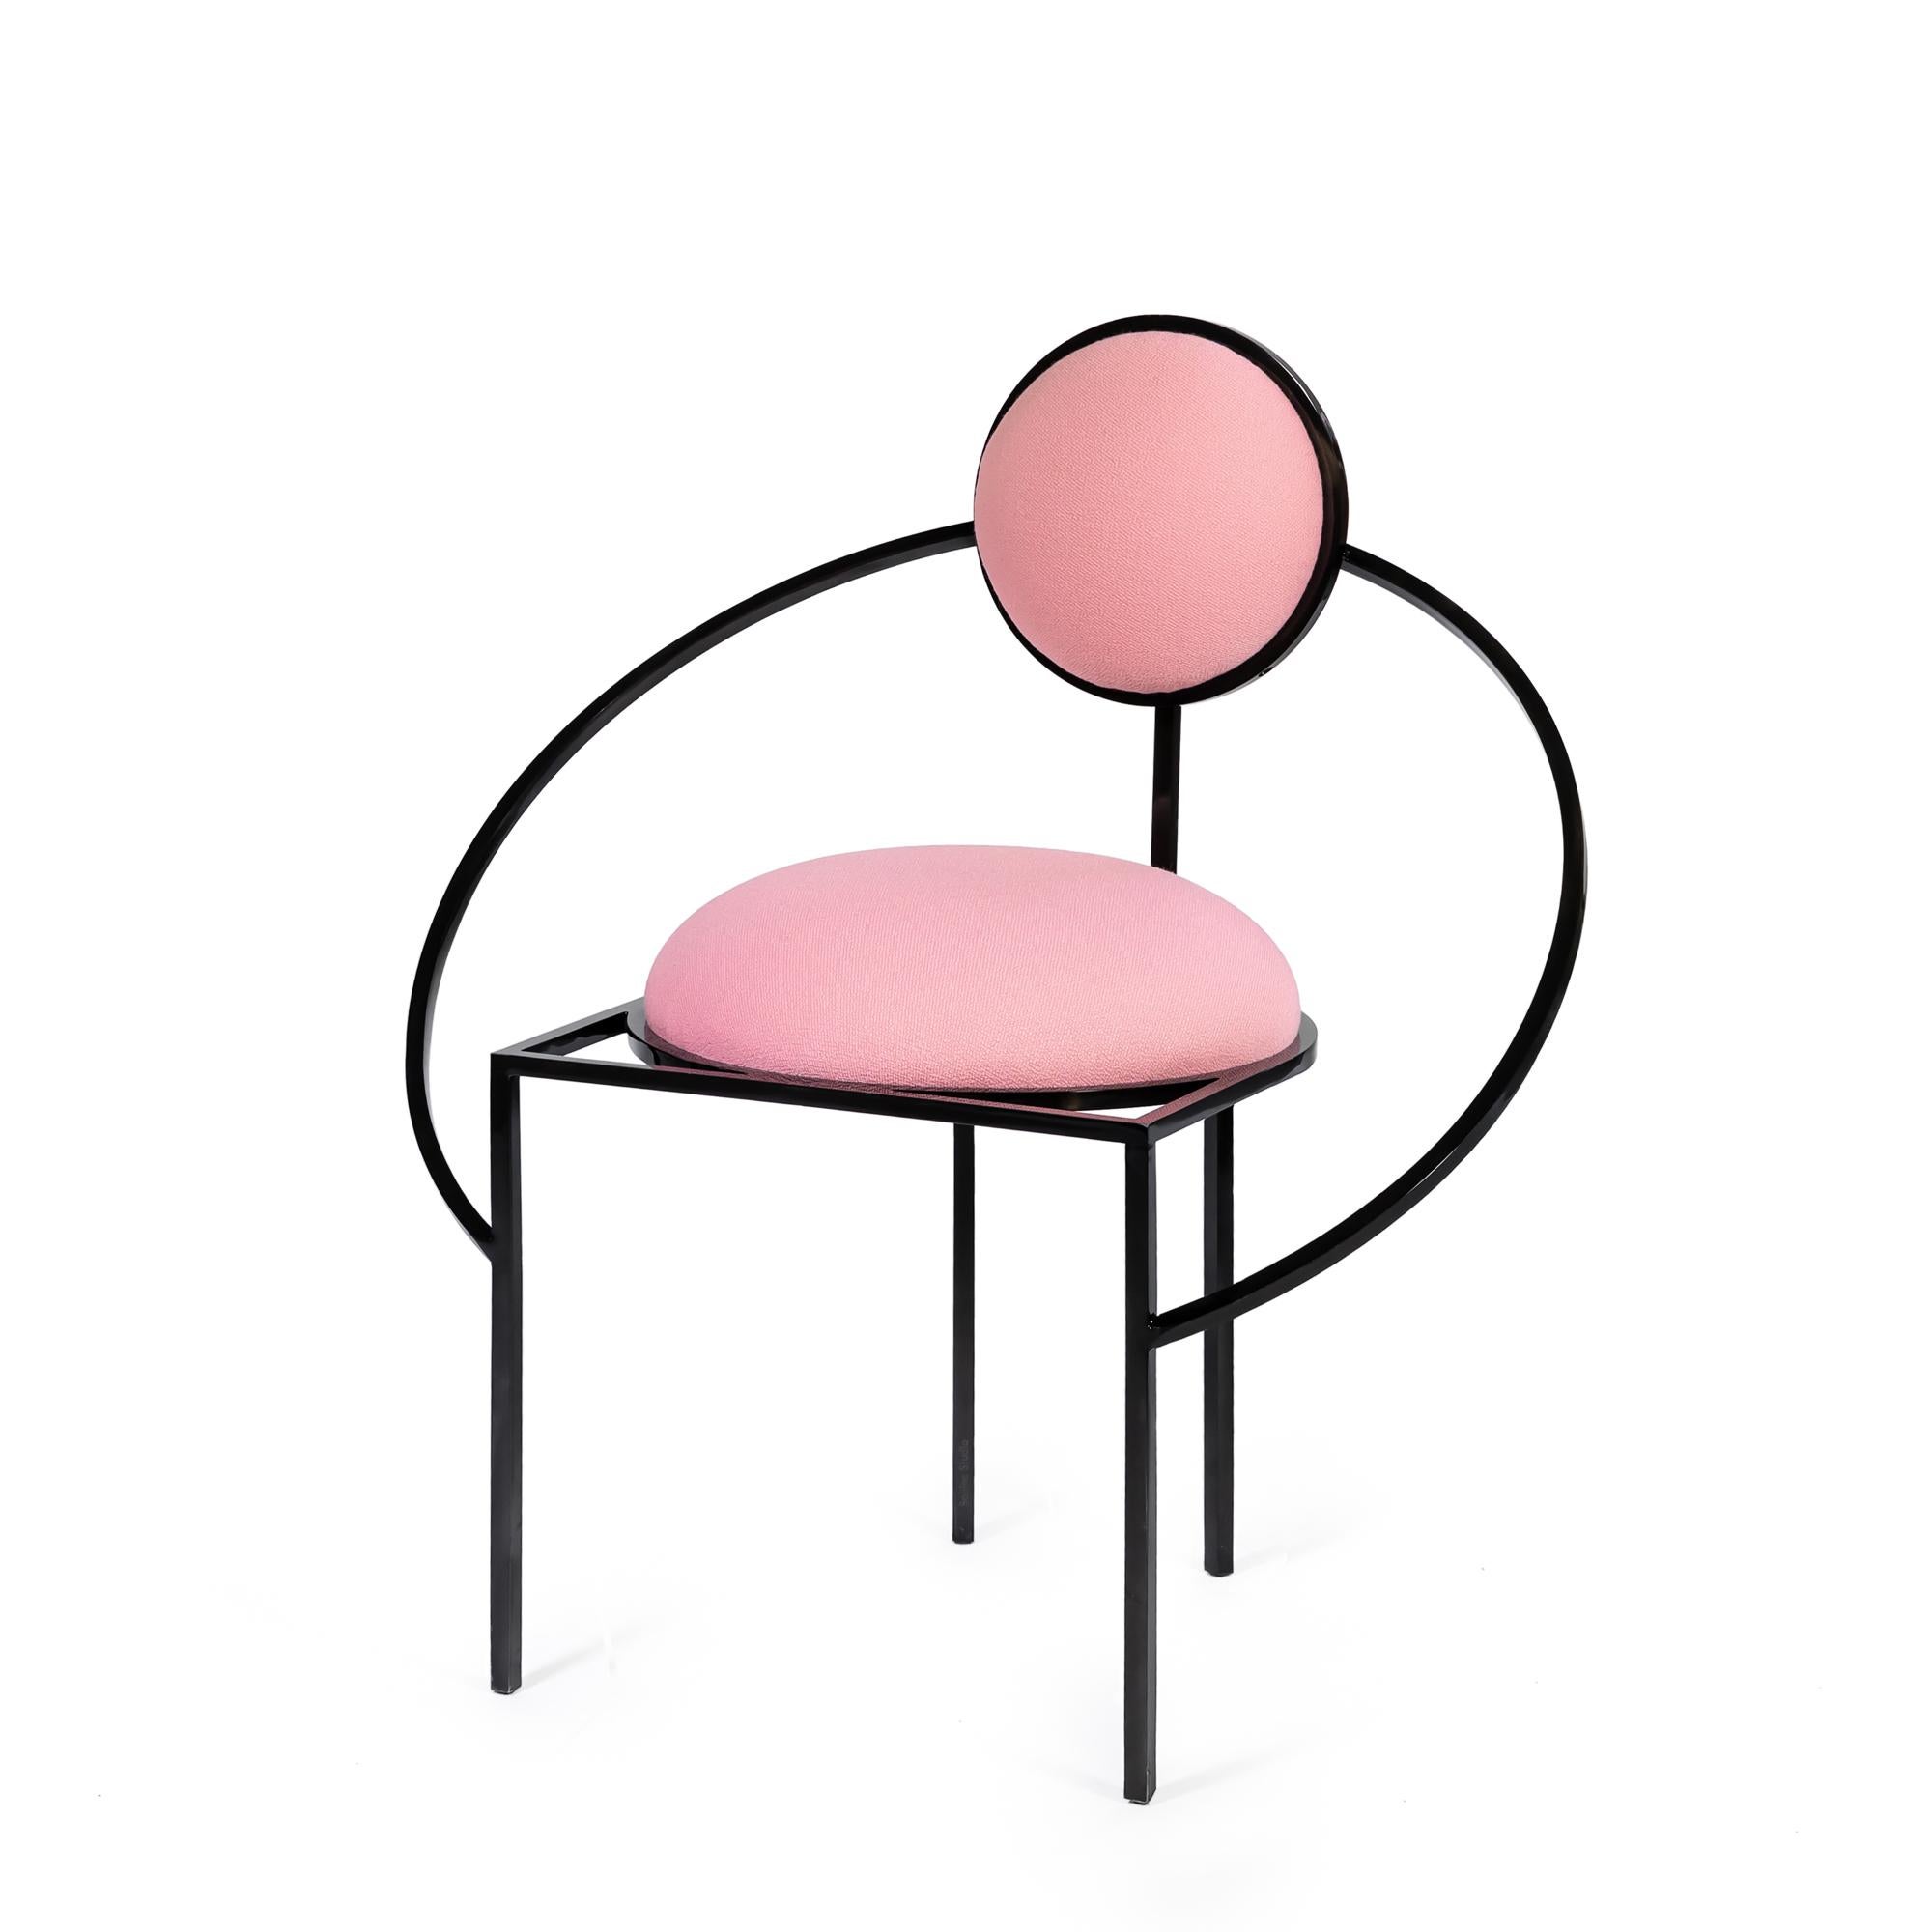 This is the first time that Bohinc explores a design favourite; the chair.

In the collection, Lara Bohinc develops her stellar themes, finding inspiration in planetary and lunar orbits, whose gravitationally curved trajectories drive the lines and